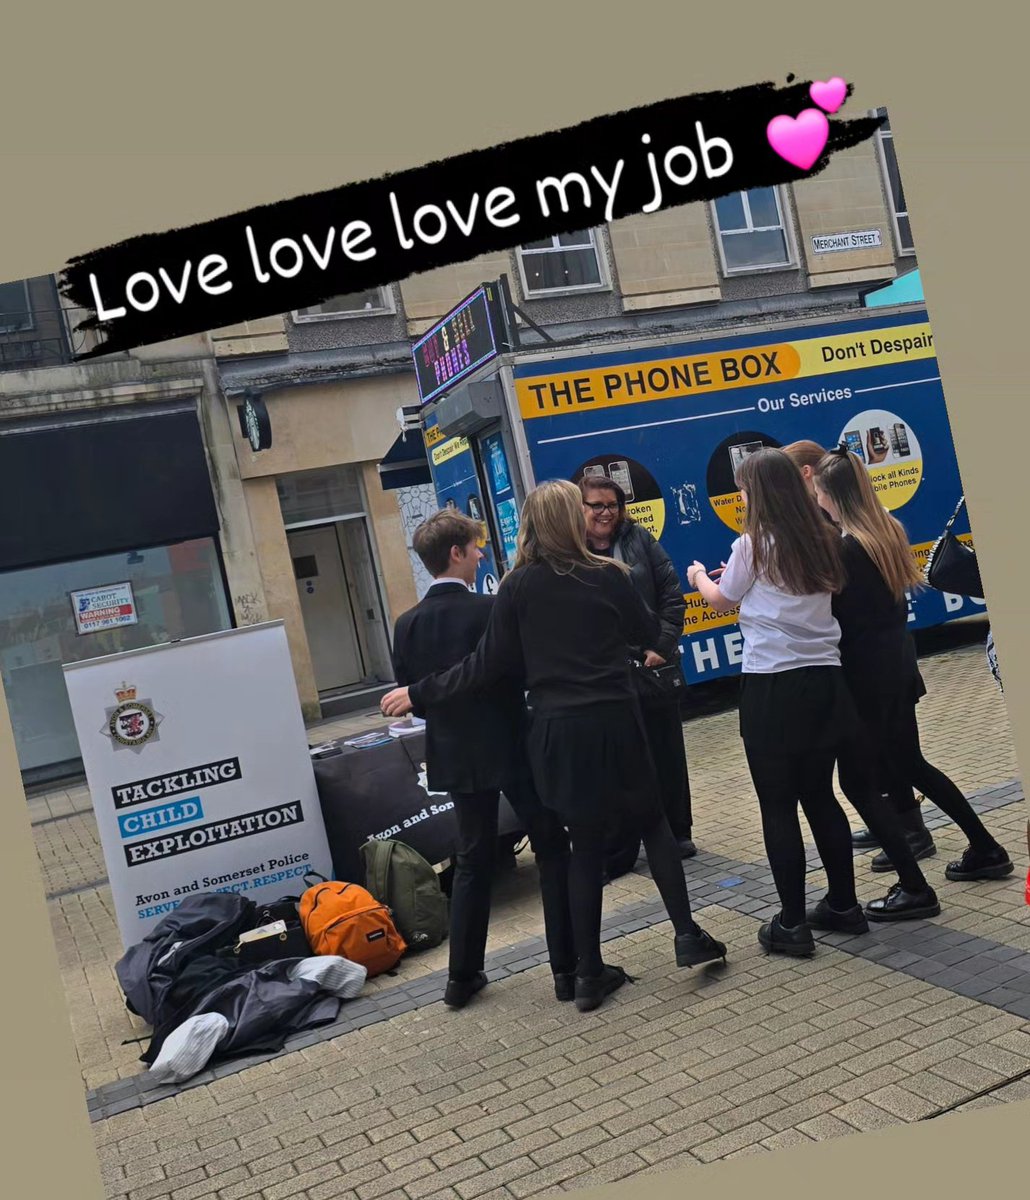 During our engagement in Broadmead, a group of young people recognized me from attending their school previously & came for a chat. It was a pleasure to interact with these remarkable young people. Give young people space and voice, and you will be surprised. @ASPolice #cse #cce